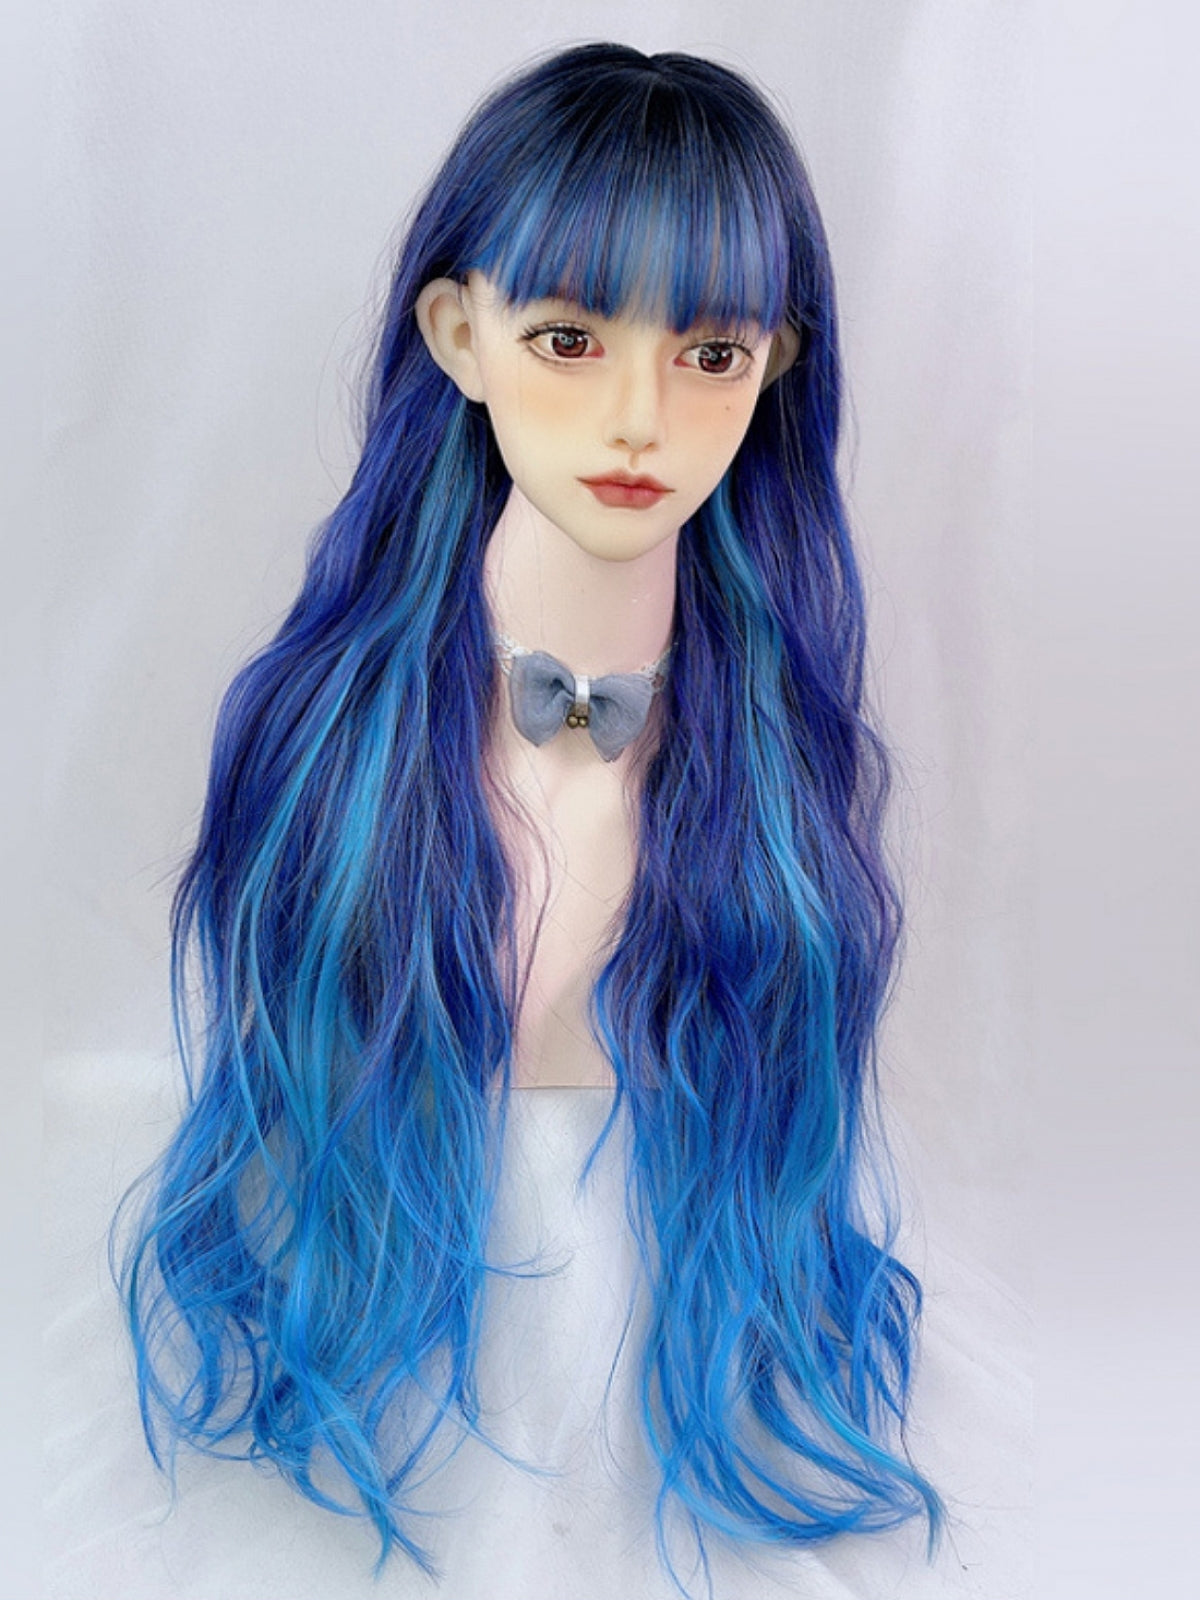 2022 Special Offer Limited Blue and Purple Mixed Color Long Wavy Synthetic Wig with Bangs